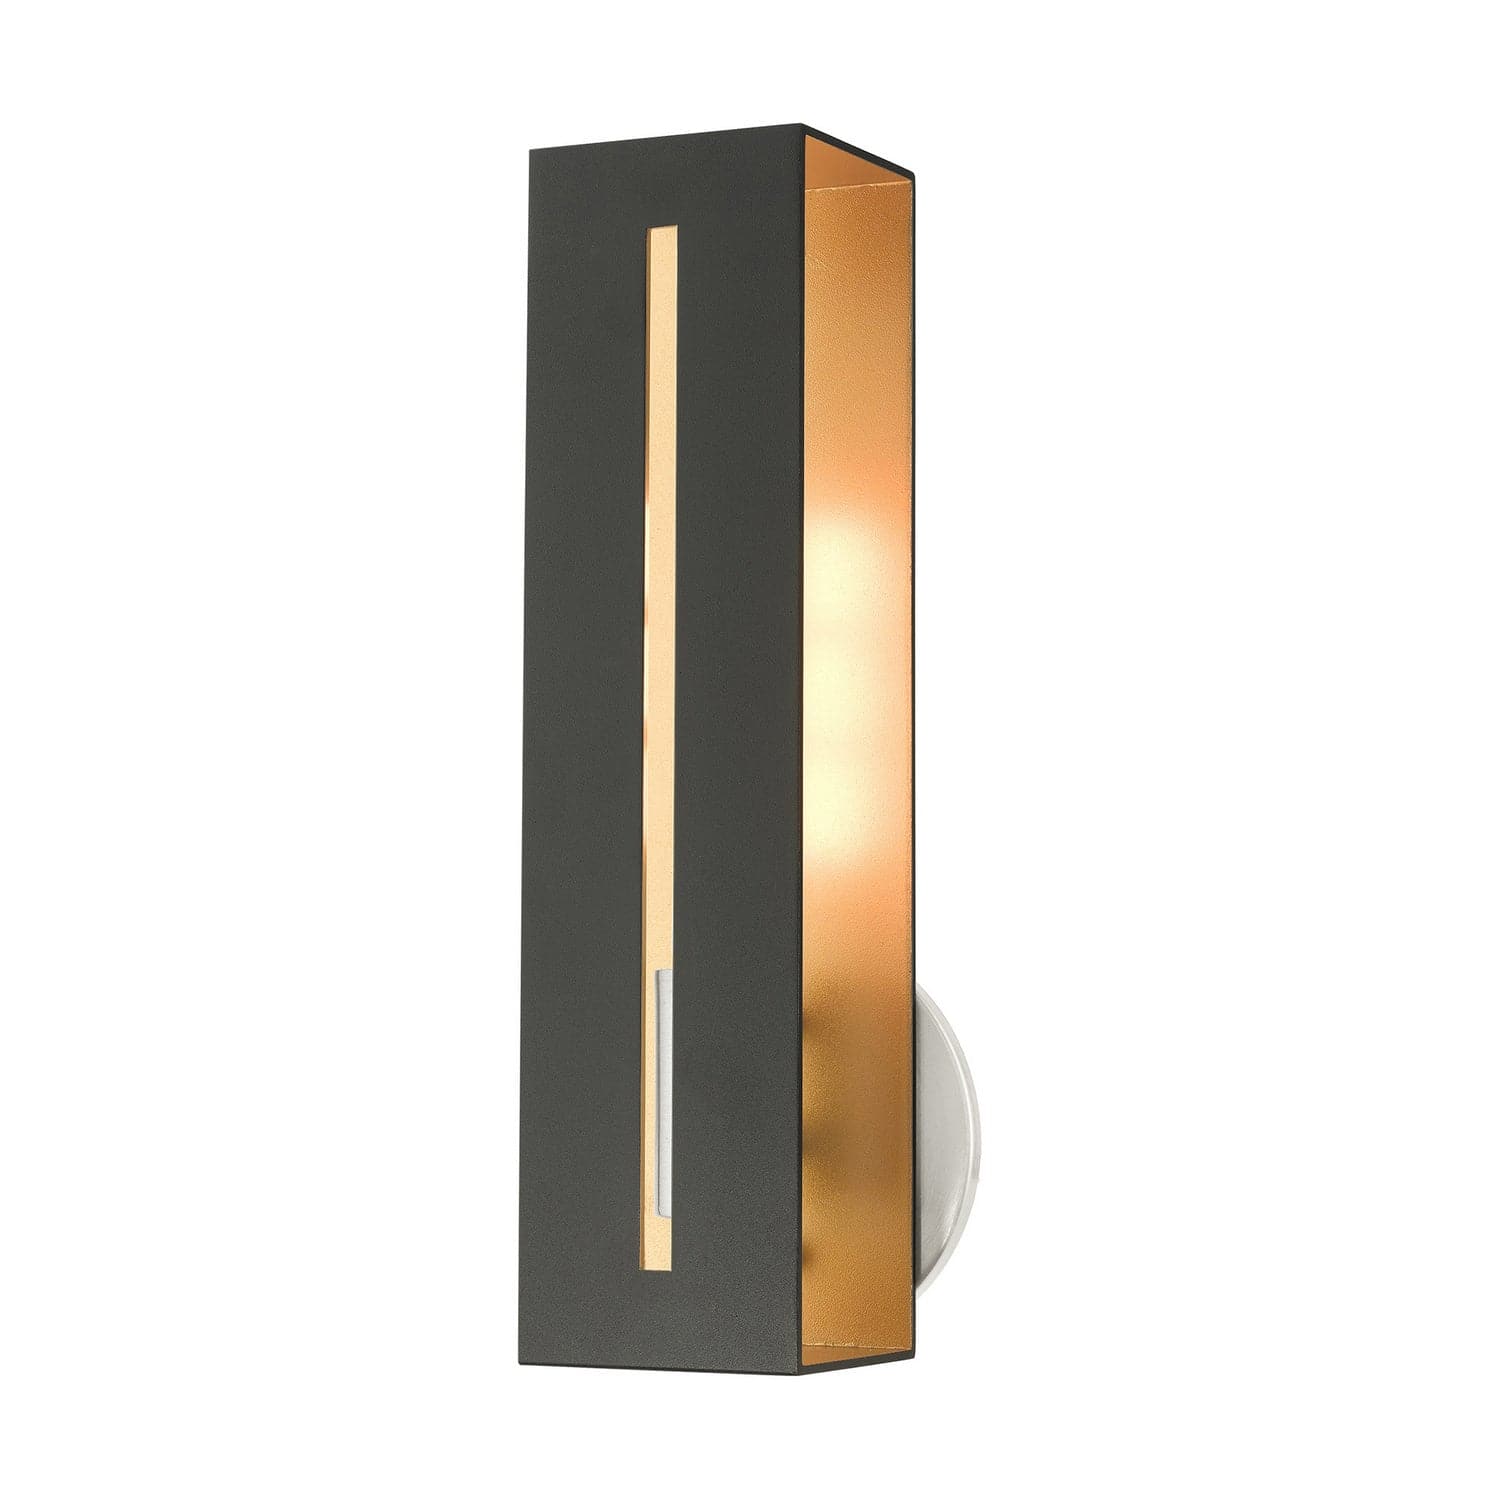 Livex Lighting - 45953-14 - One Light Wall Sconce - Soma - Textured Black w/ Brushed Nickels